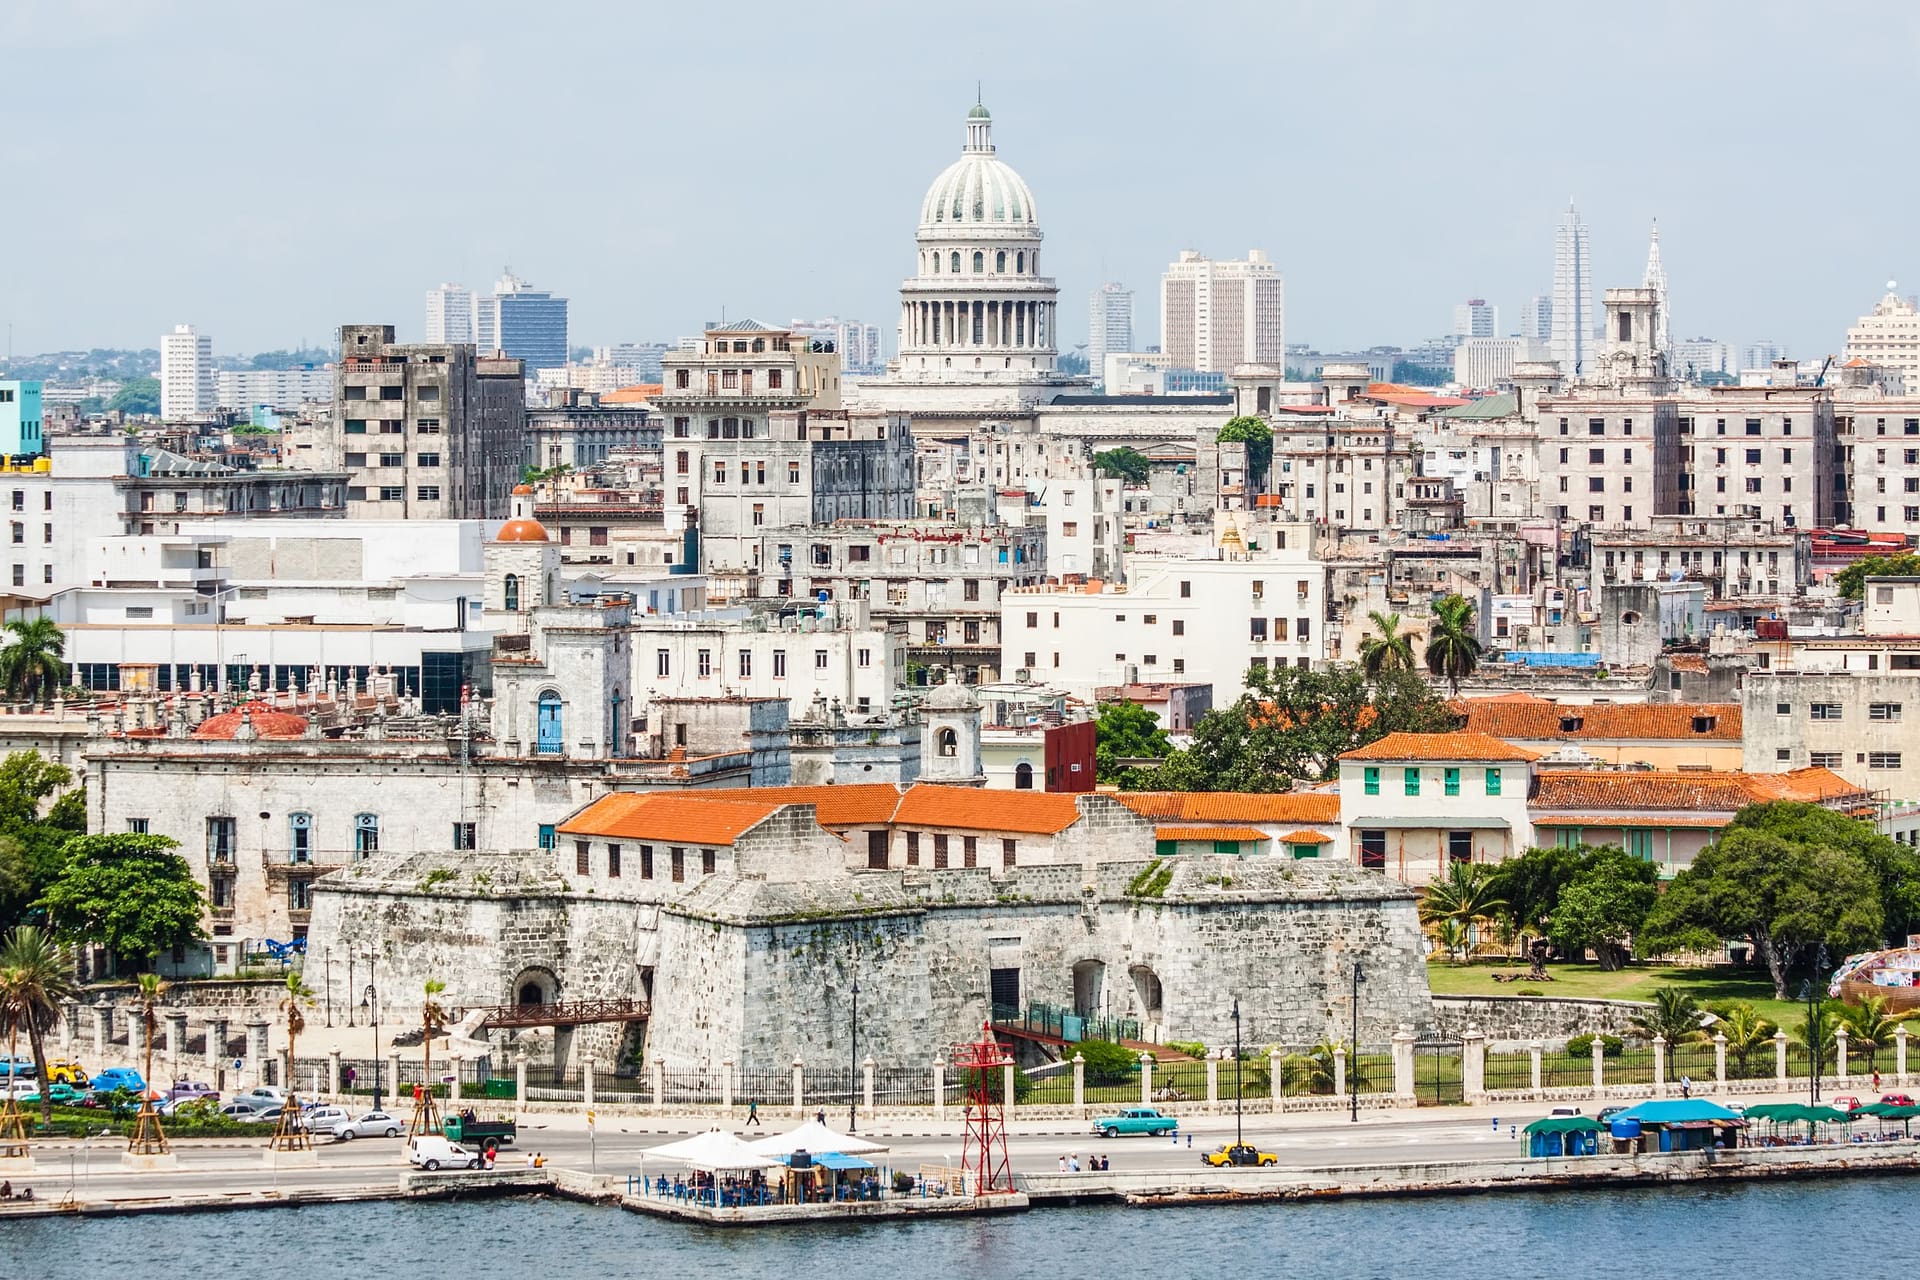 The city of Havana including the old town and several iconic buildings